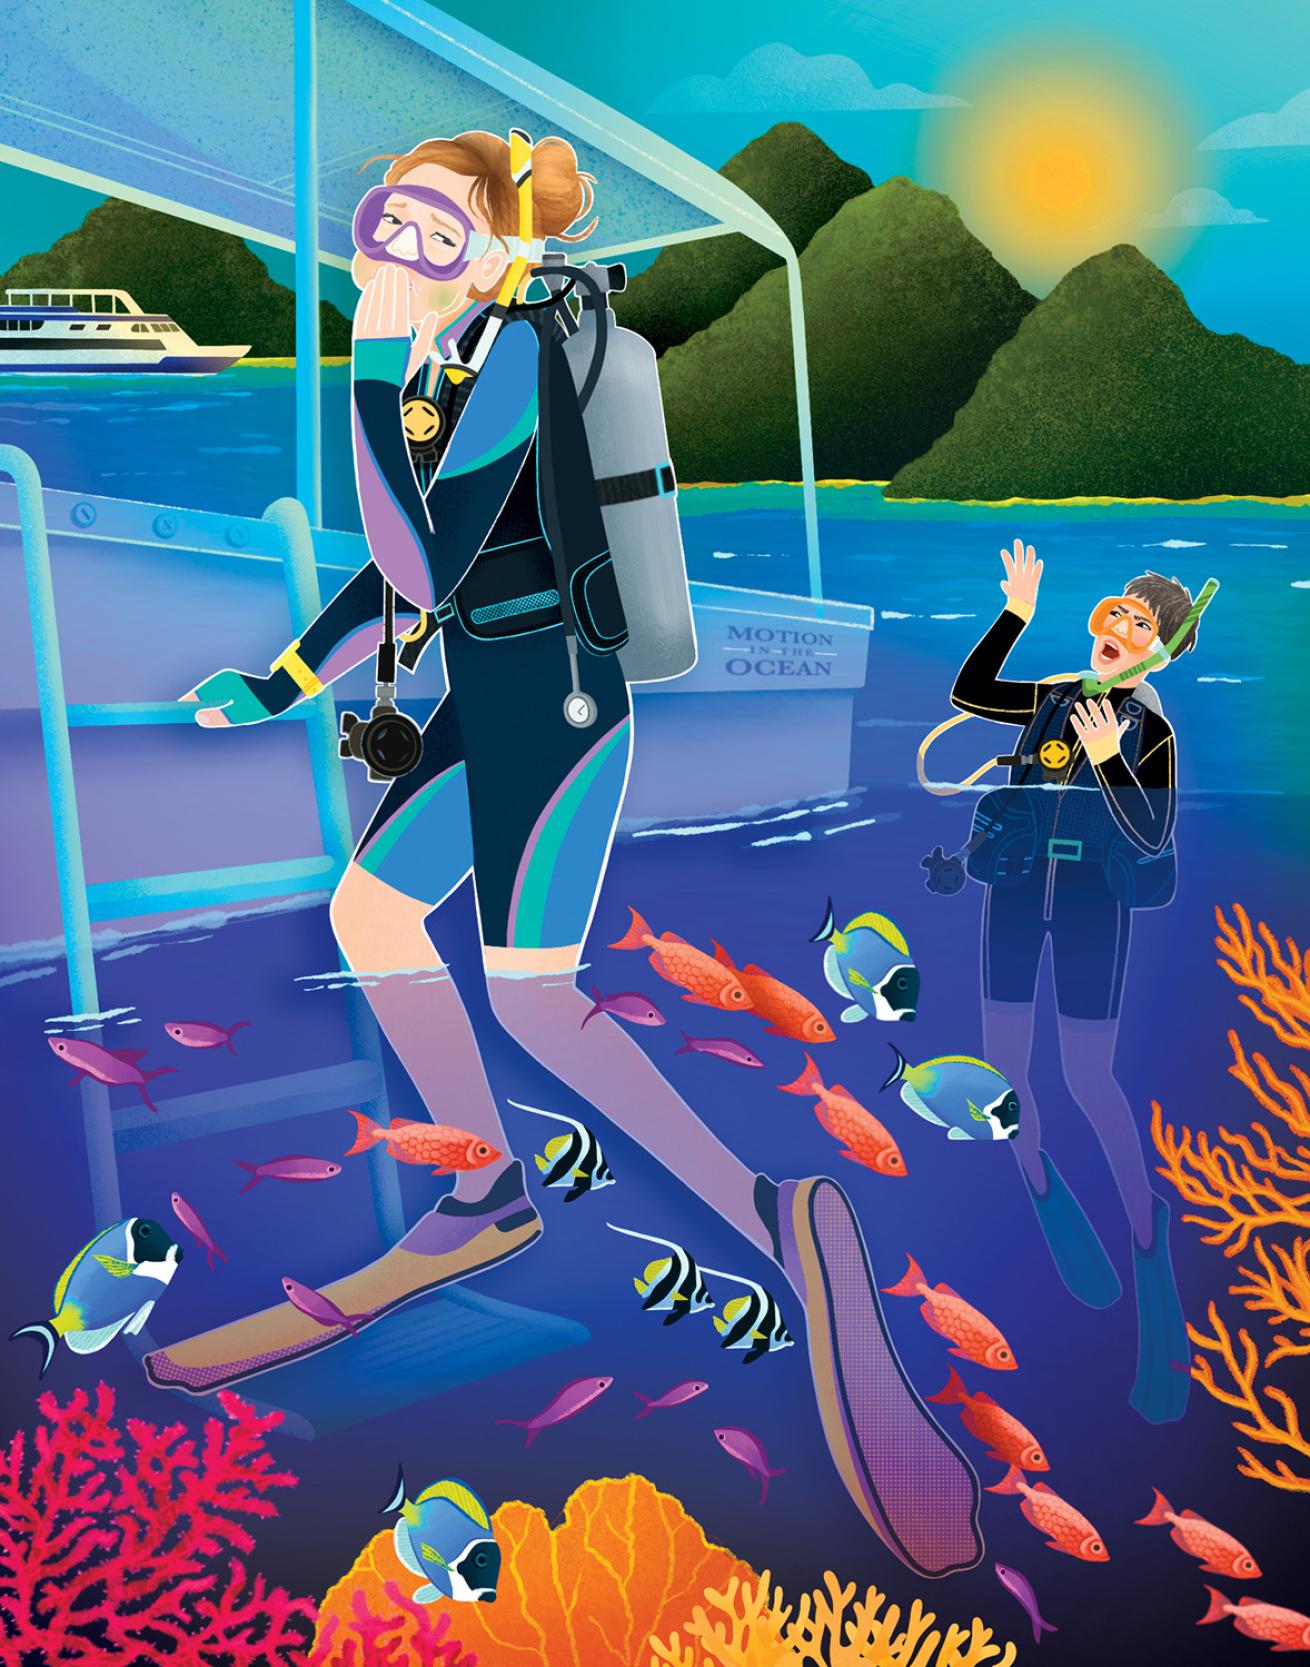 Illustration of a diver getting onto a boat looking sea sick with beautiful mountains in the background and coral reef underneath